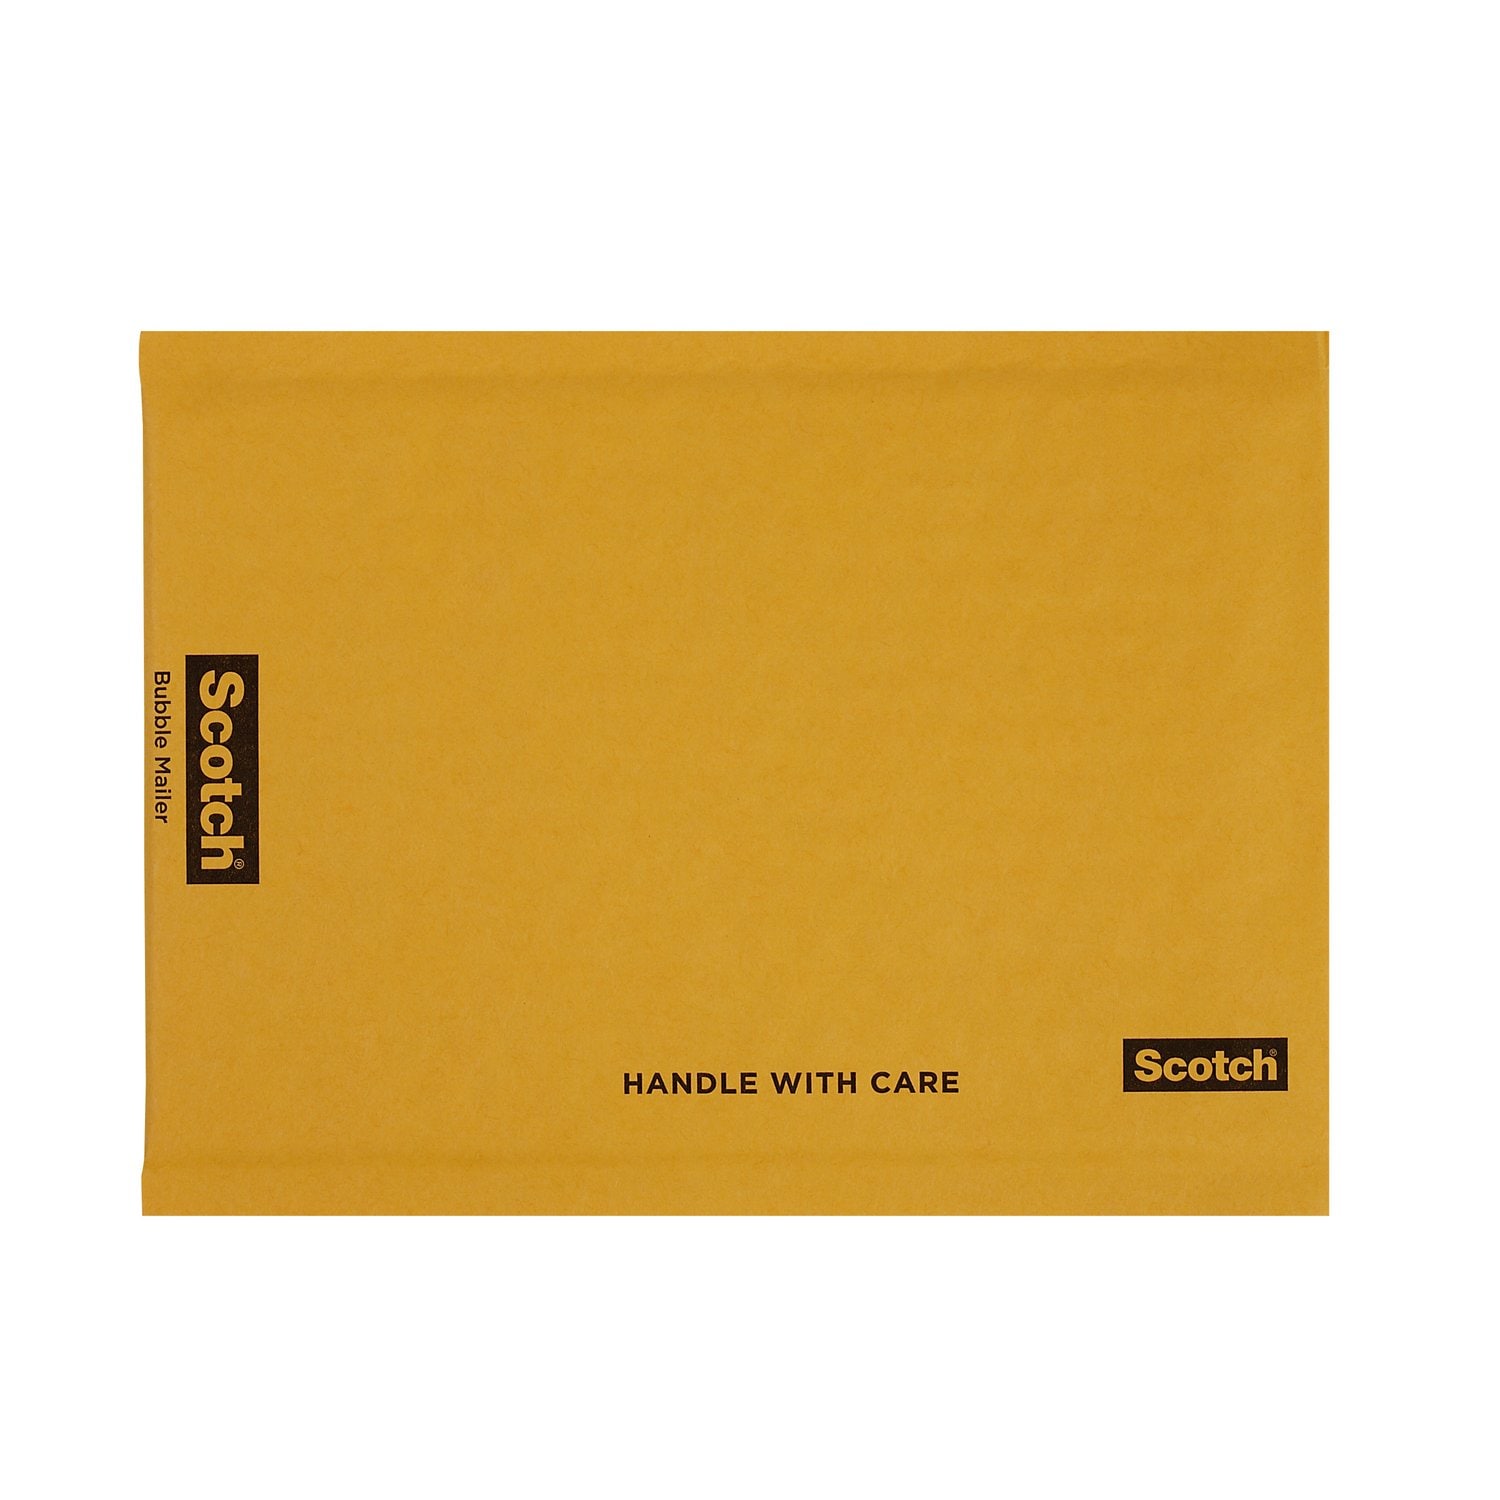 7010370880 - Scotch Bubble Mailer 7913, 6 in x 9 in Size 0